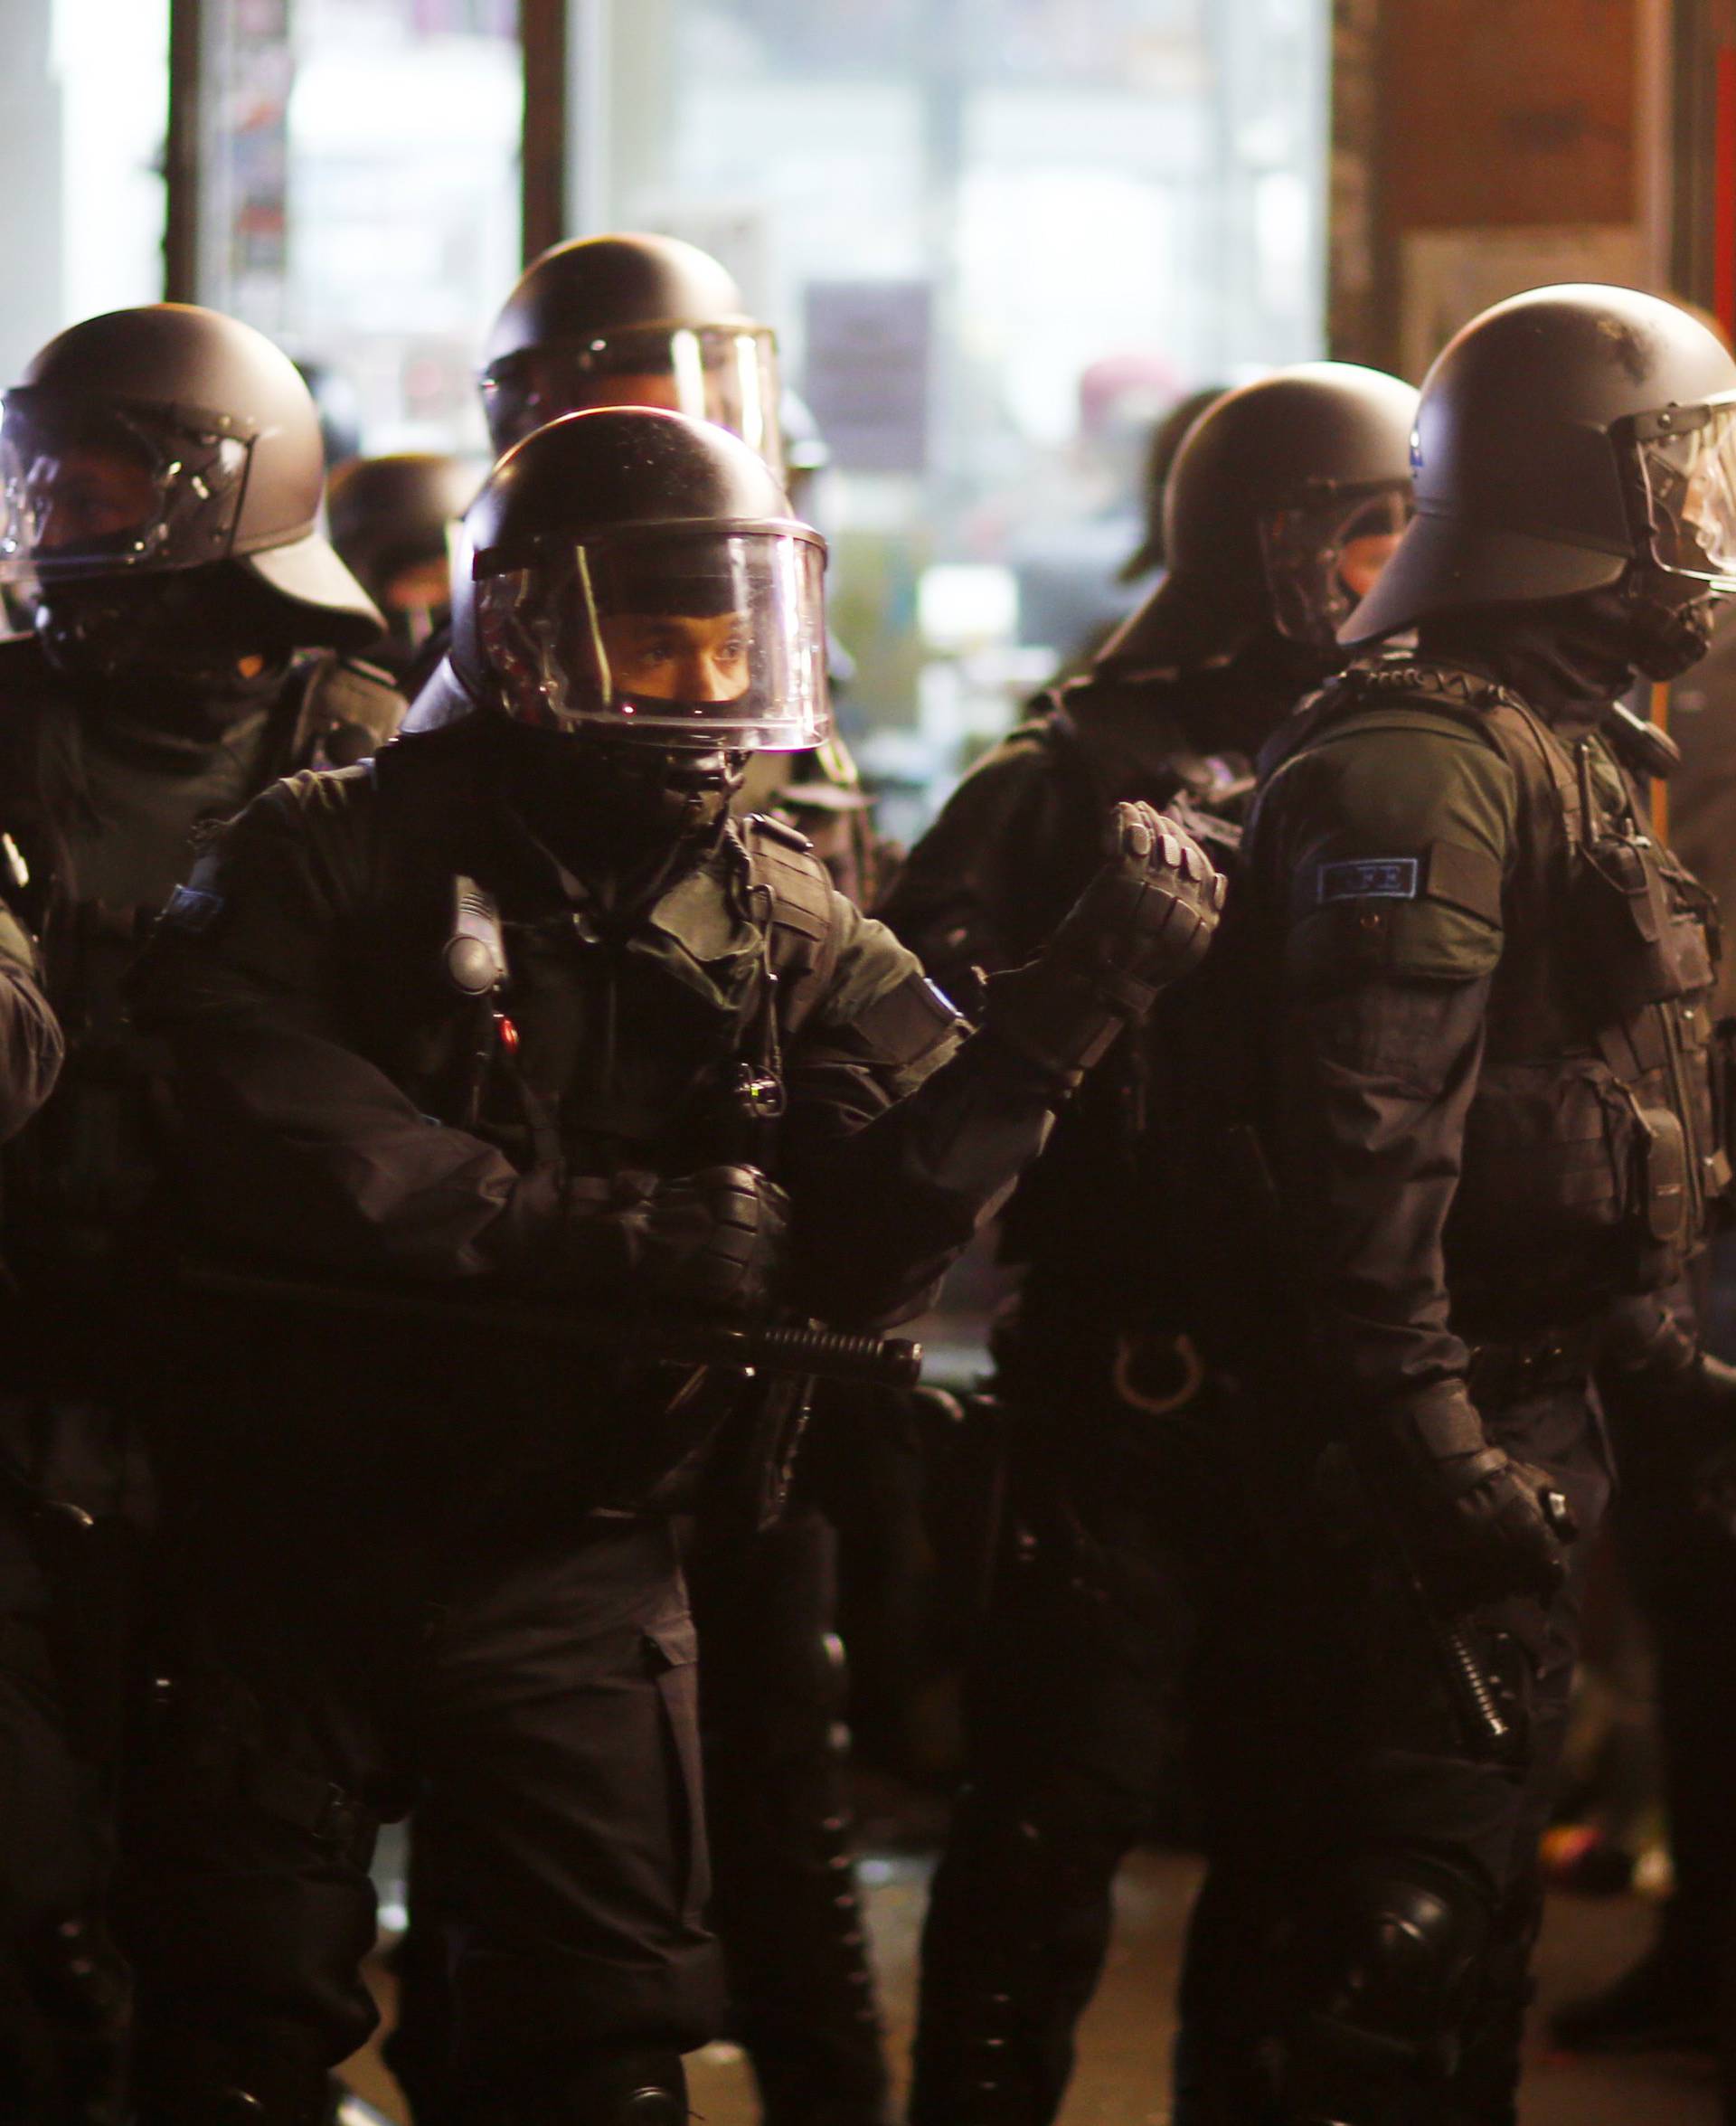 German riot police stand guard during the demonstration at the G20 summit in Hamburg